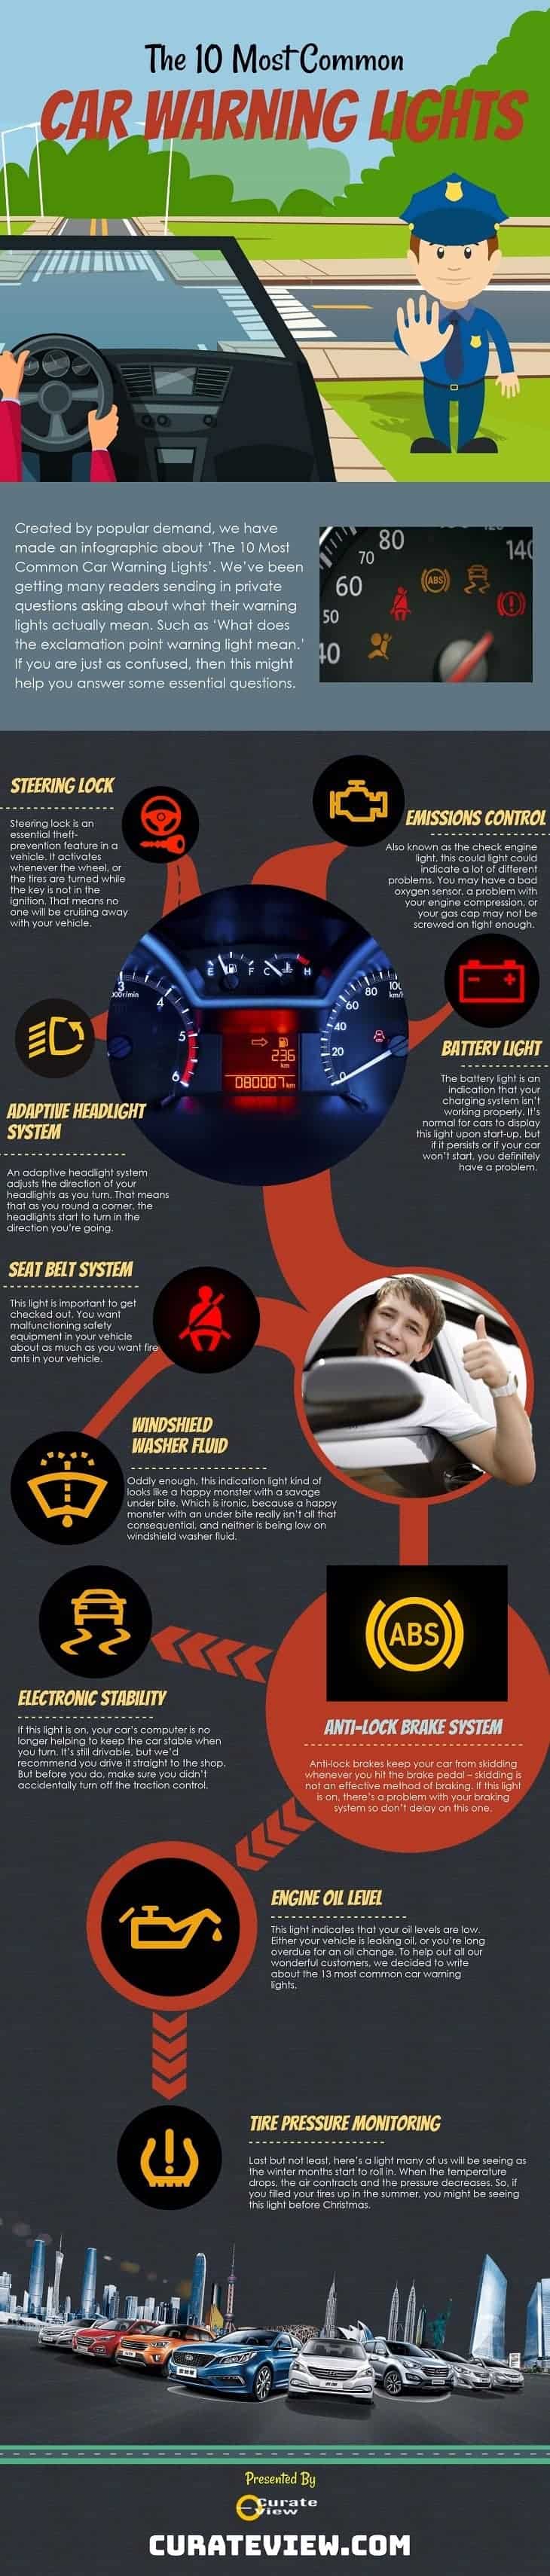 10 Most Common Car Warning Lights on Dashboard - Infographics by